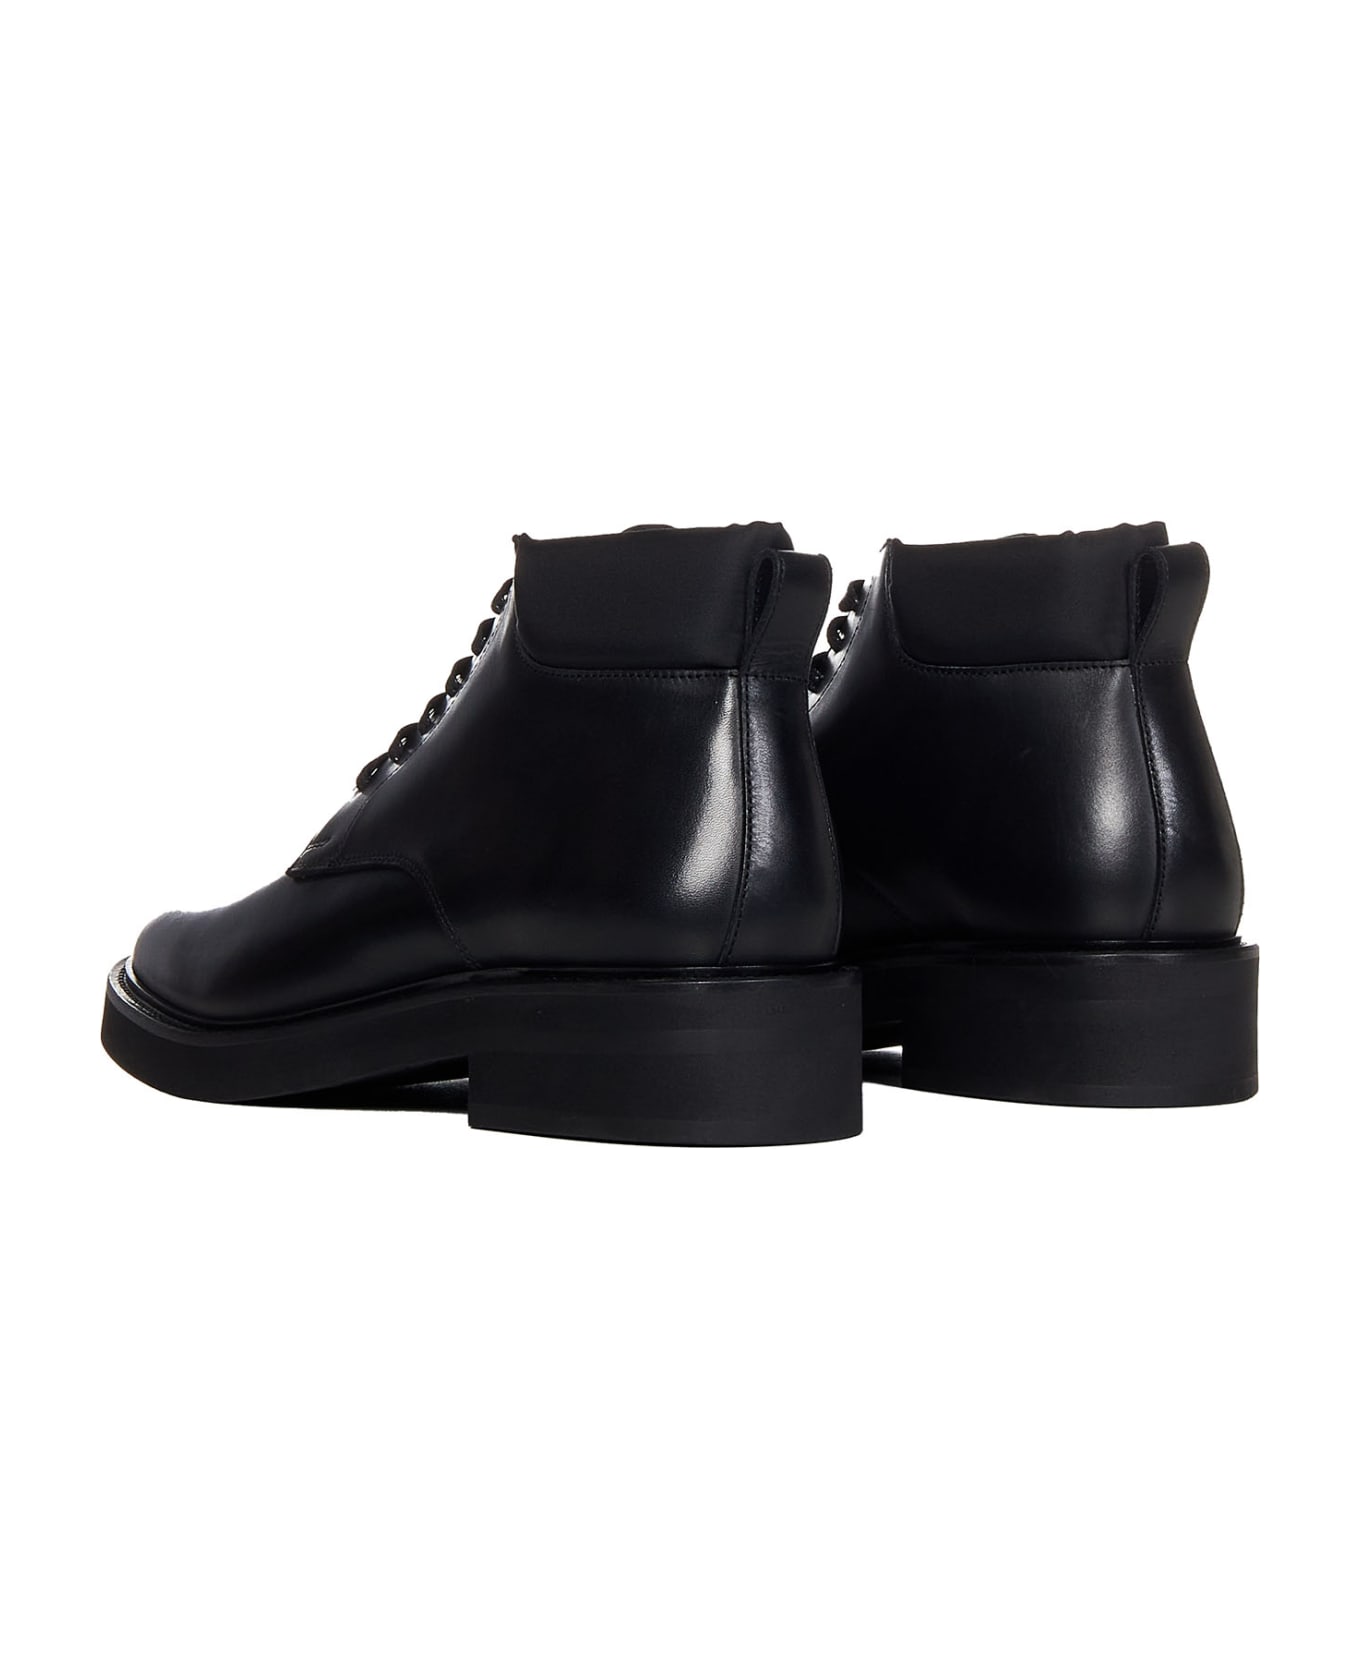 Dsquared2 Manchester City Boots - Black